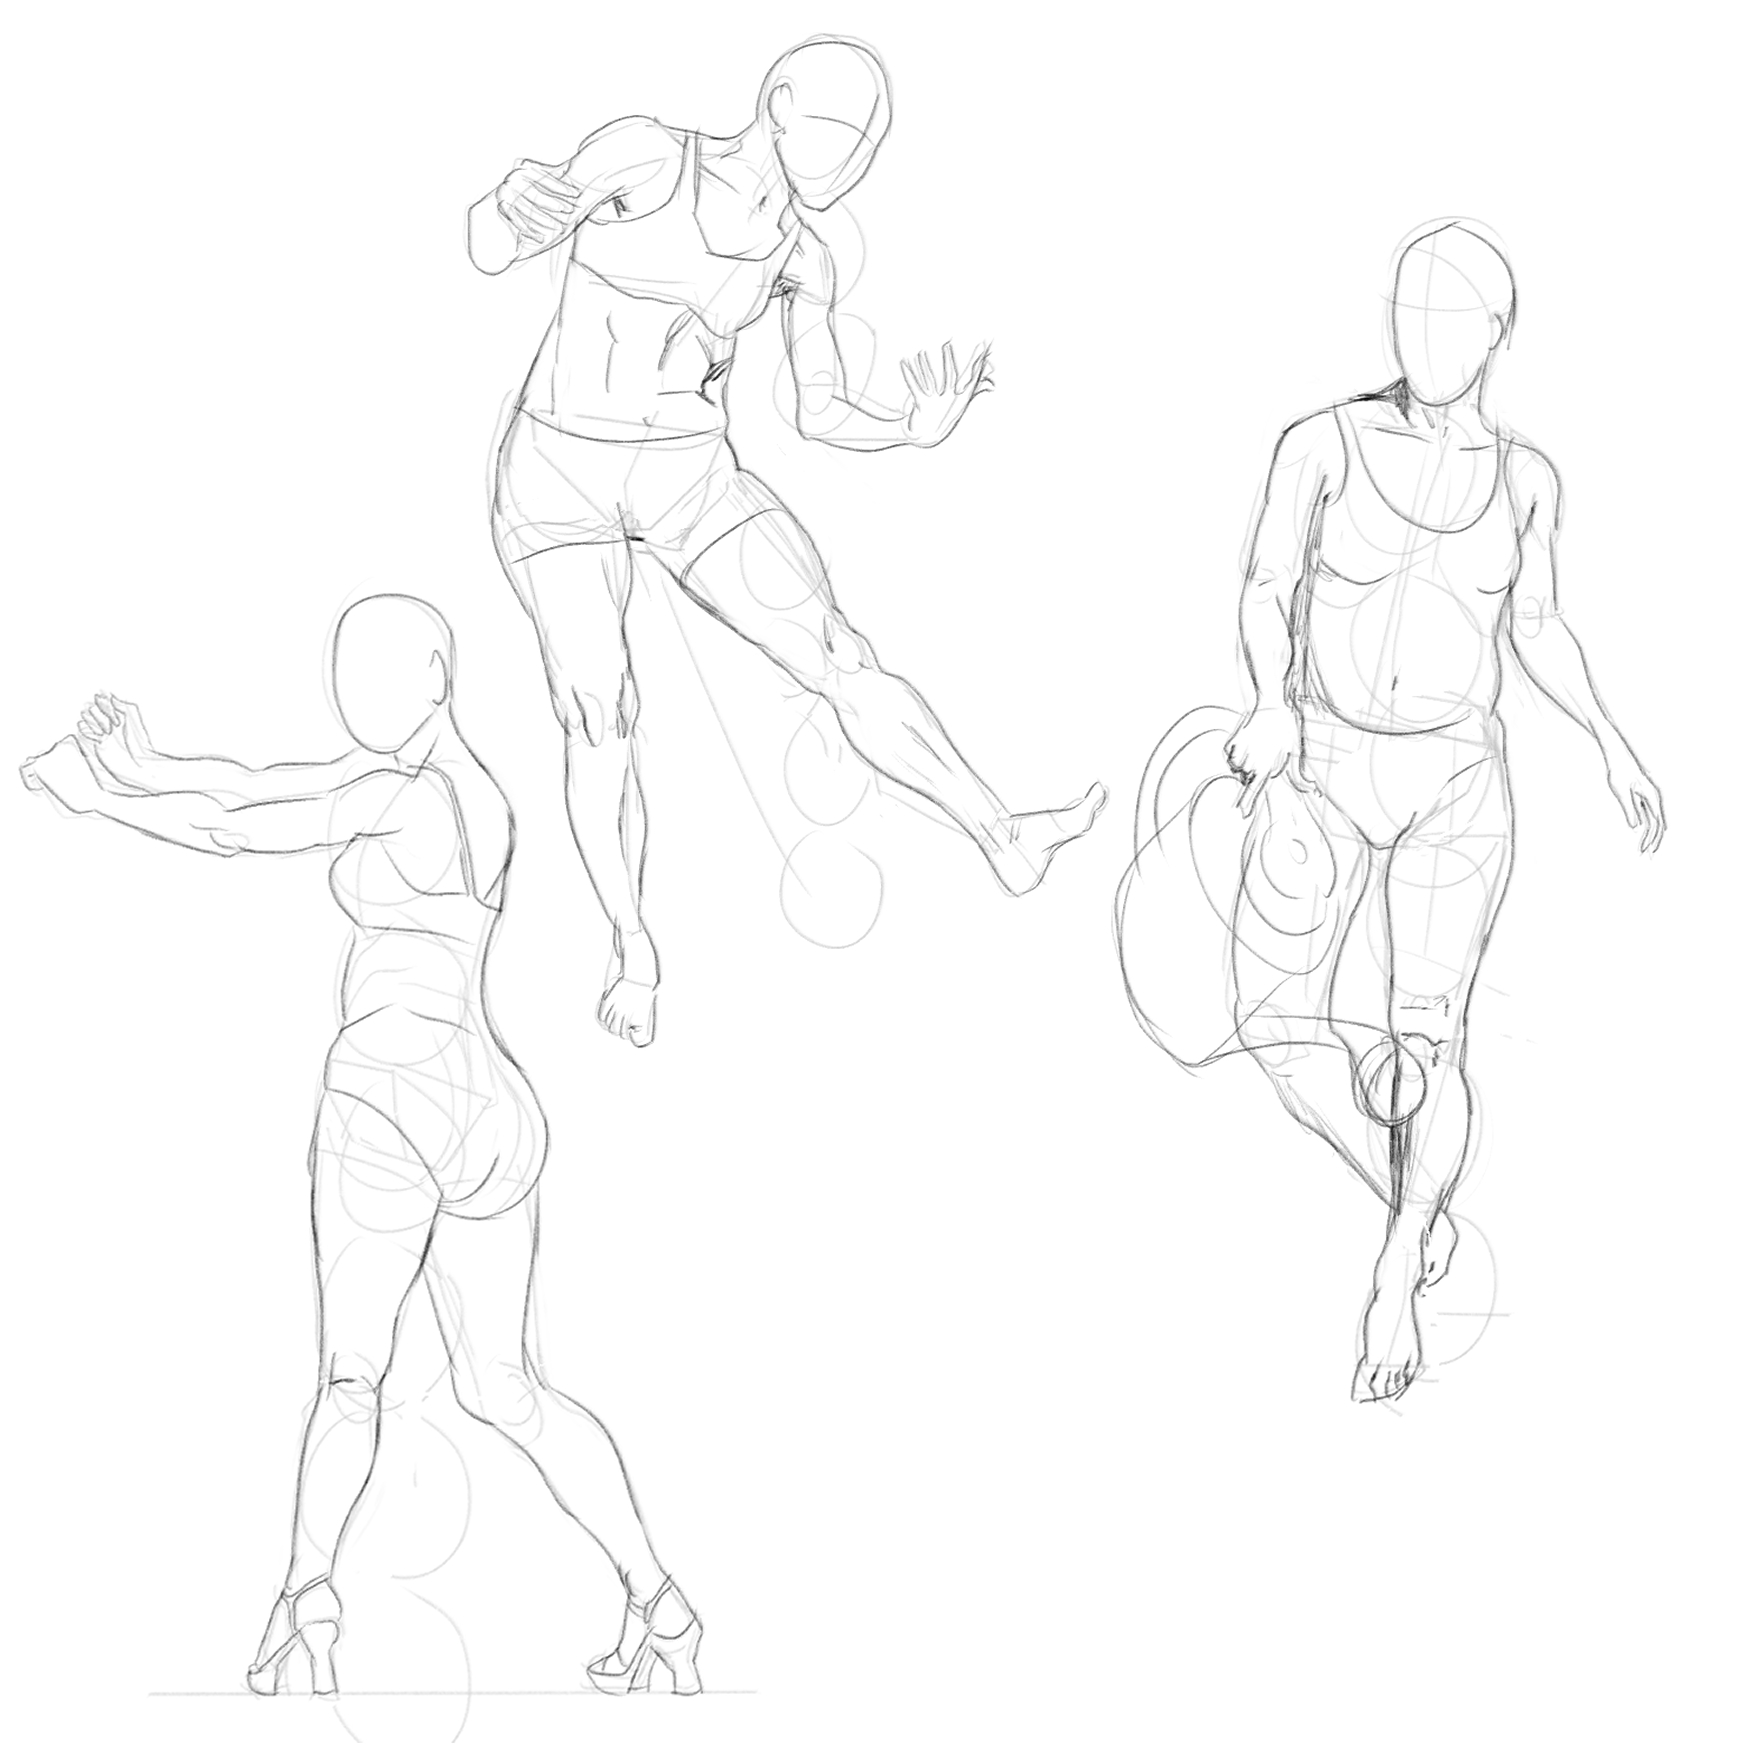 Drawing tutorial body poses 16+ Ideas, #Body #Drawing #ideas #Poses  #Tutorial | Anime poses reference, Drawing body poses, Drawing poses male